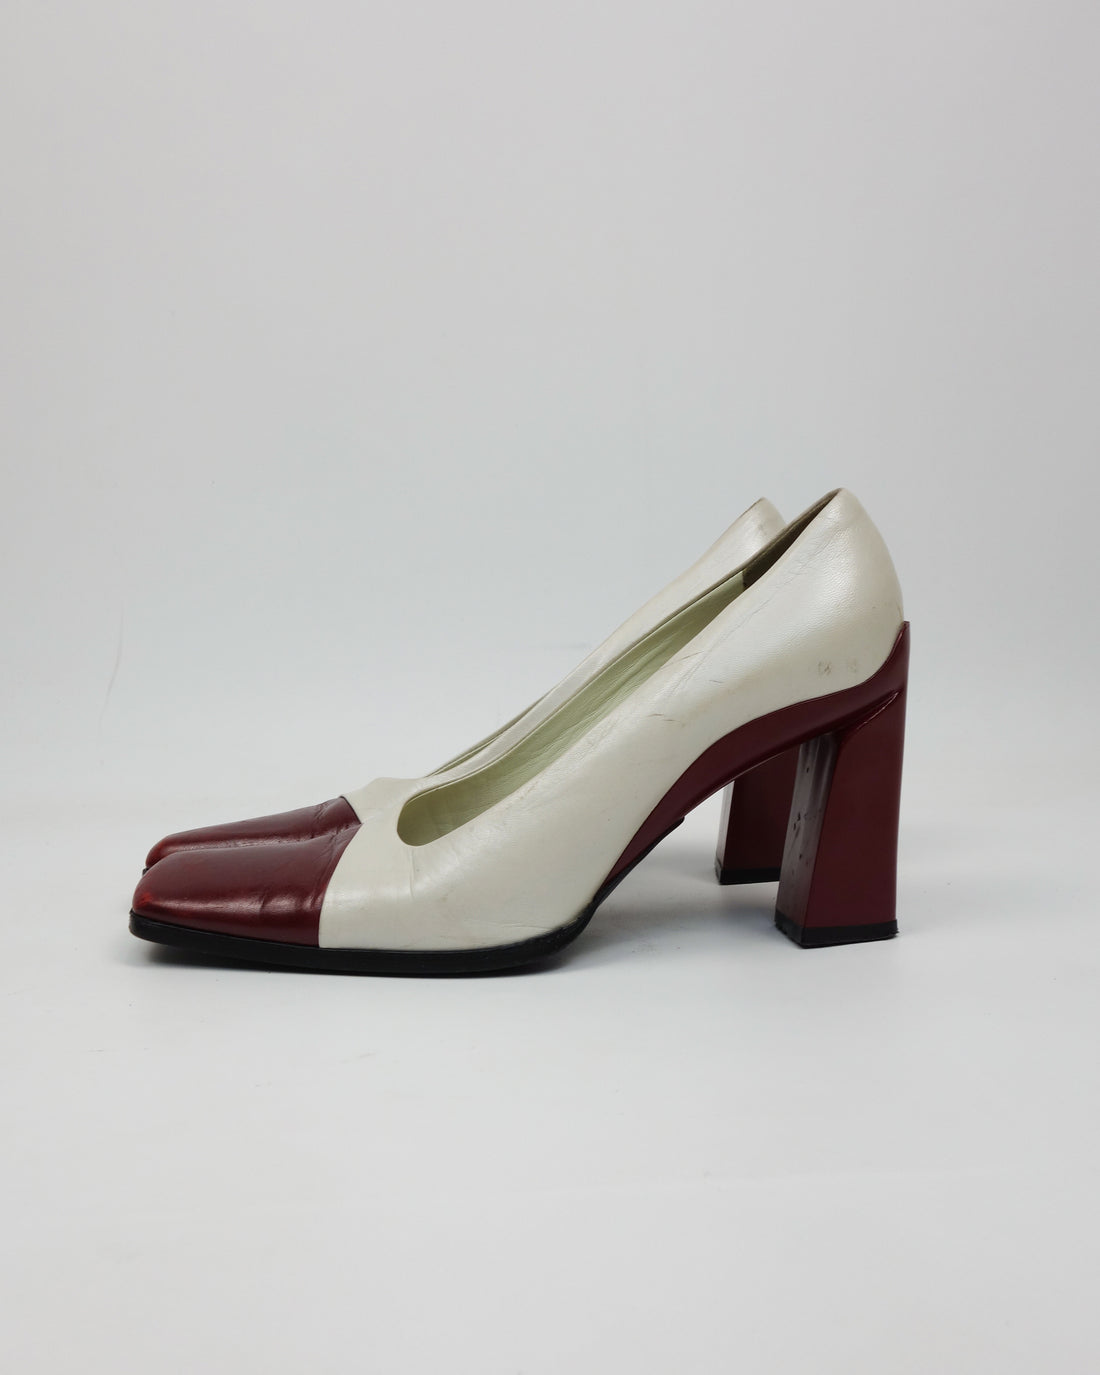 Prada Squared Toes White And Red Heels 1990's